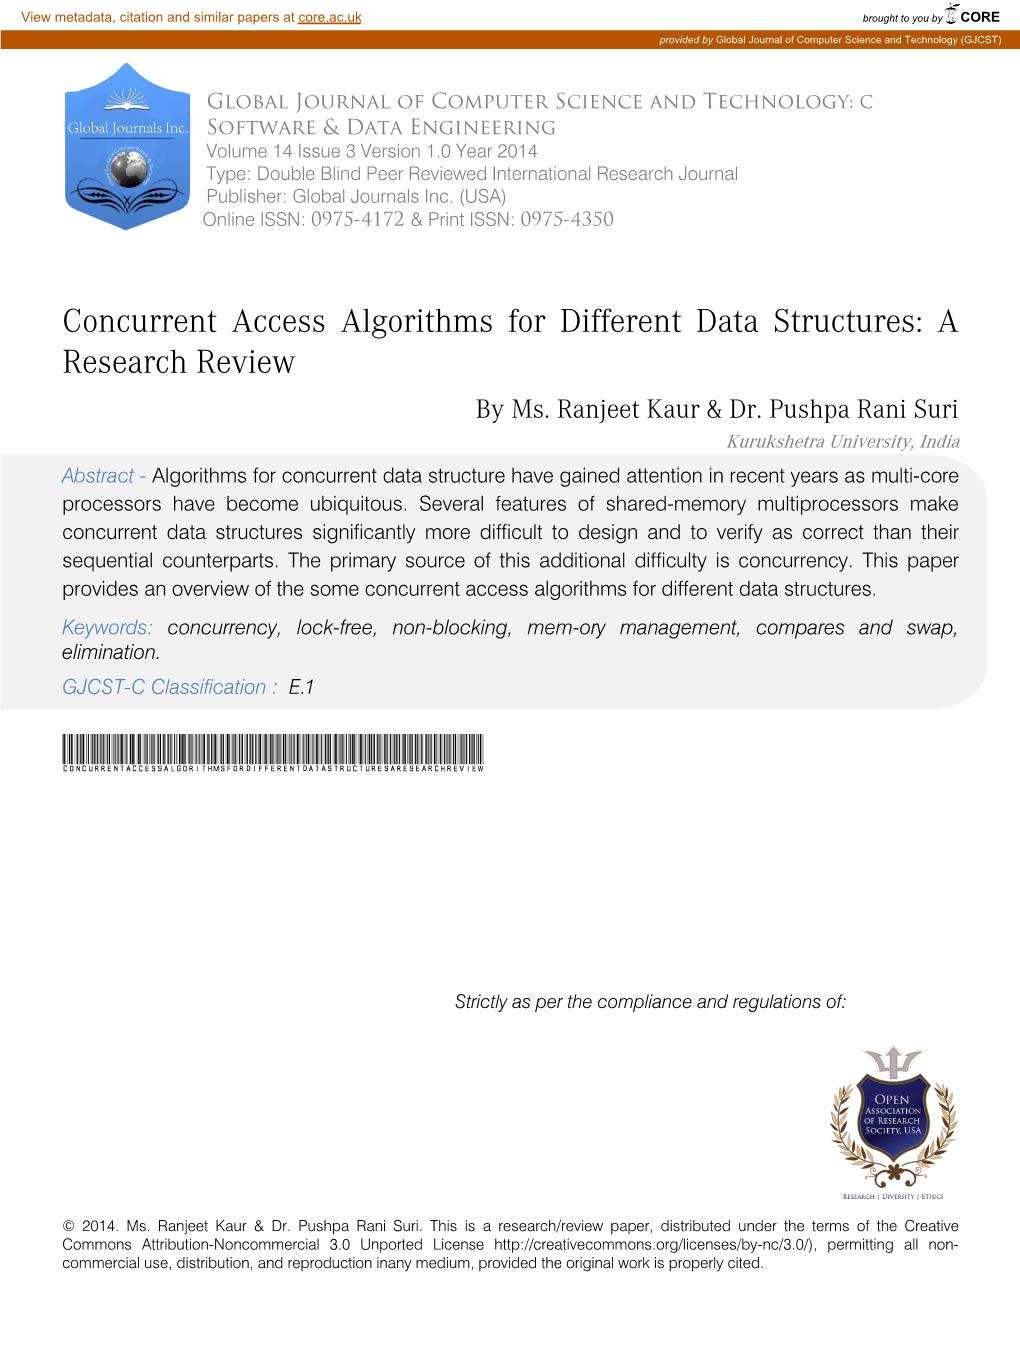 Concurrent Access Algorithms for Different Data Structures: a Research Review by Ms